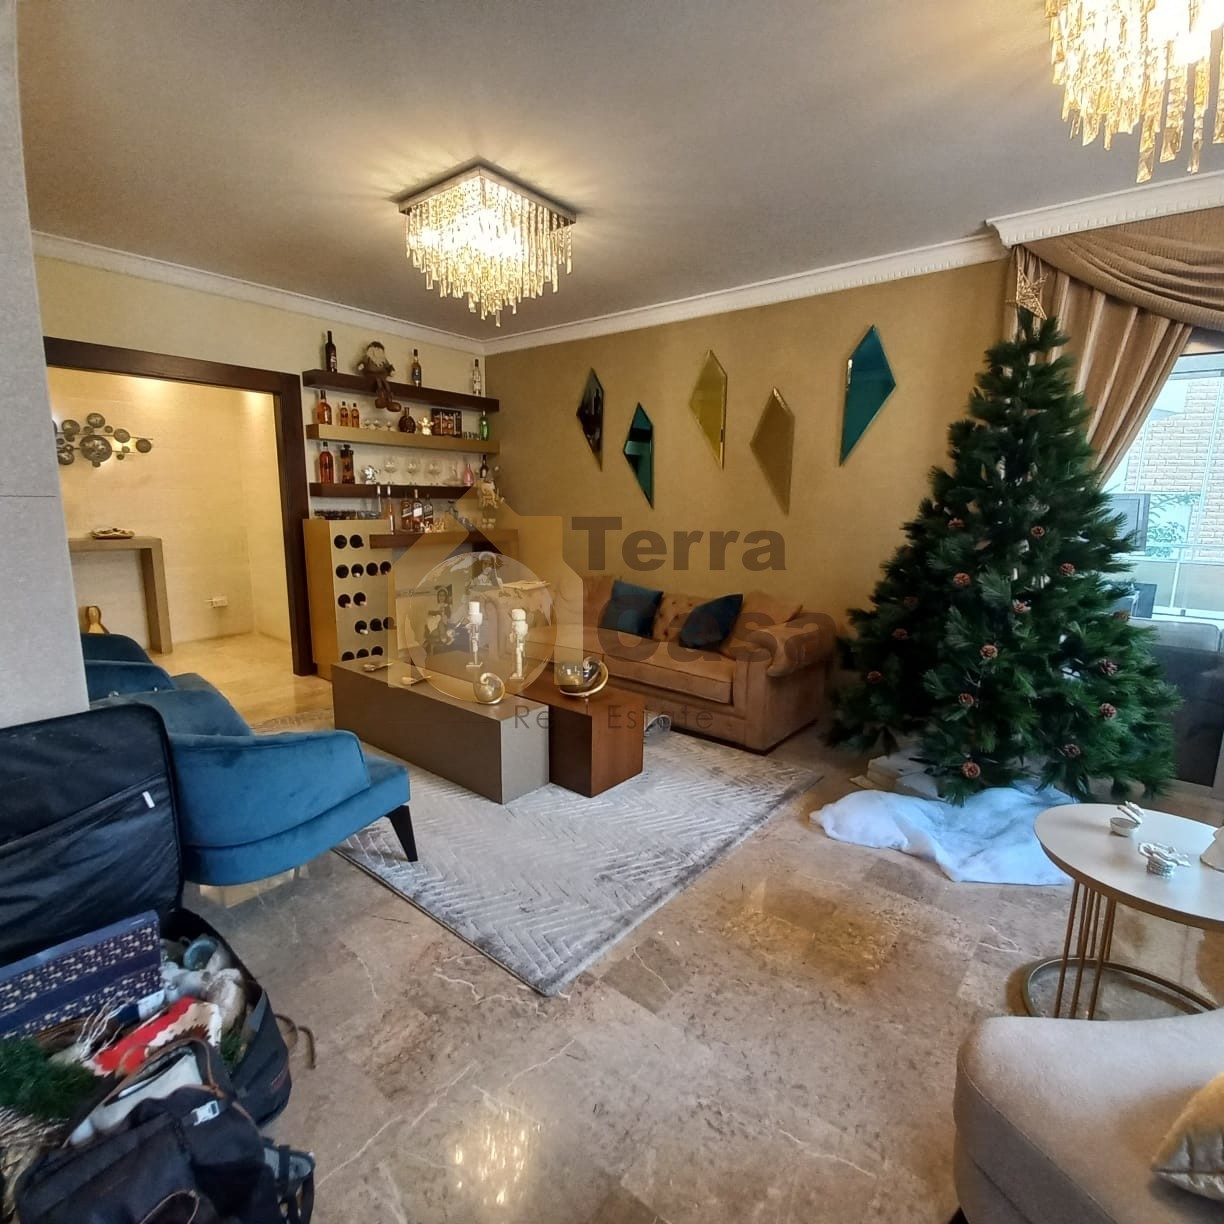 Naccache fully decorated apartment one unit per floor.